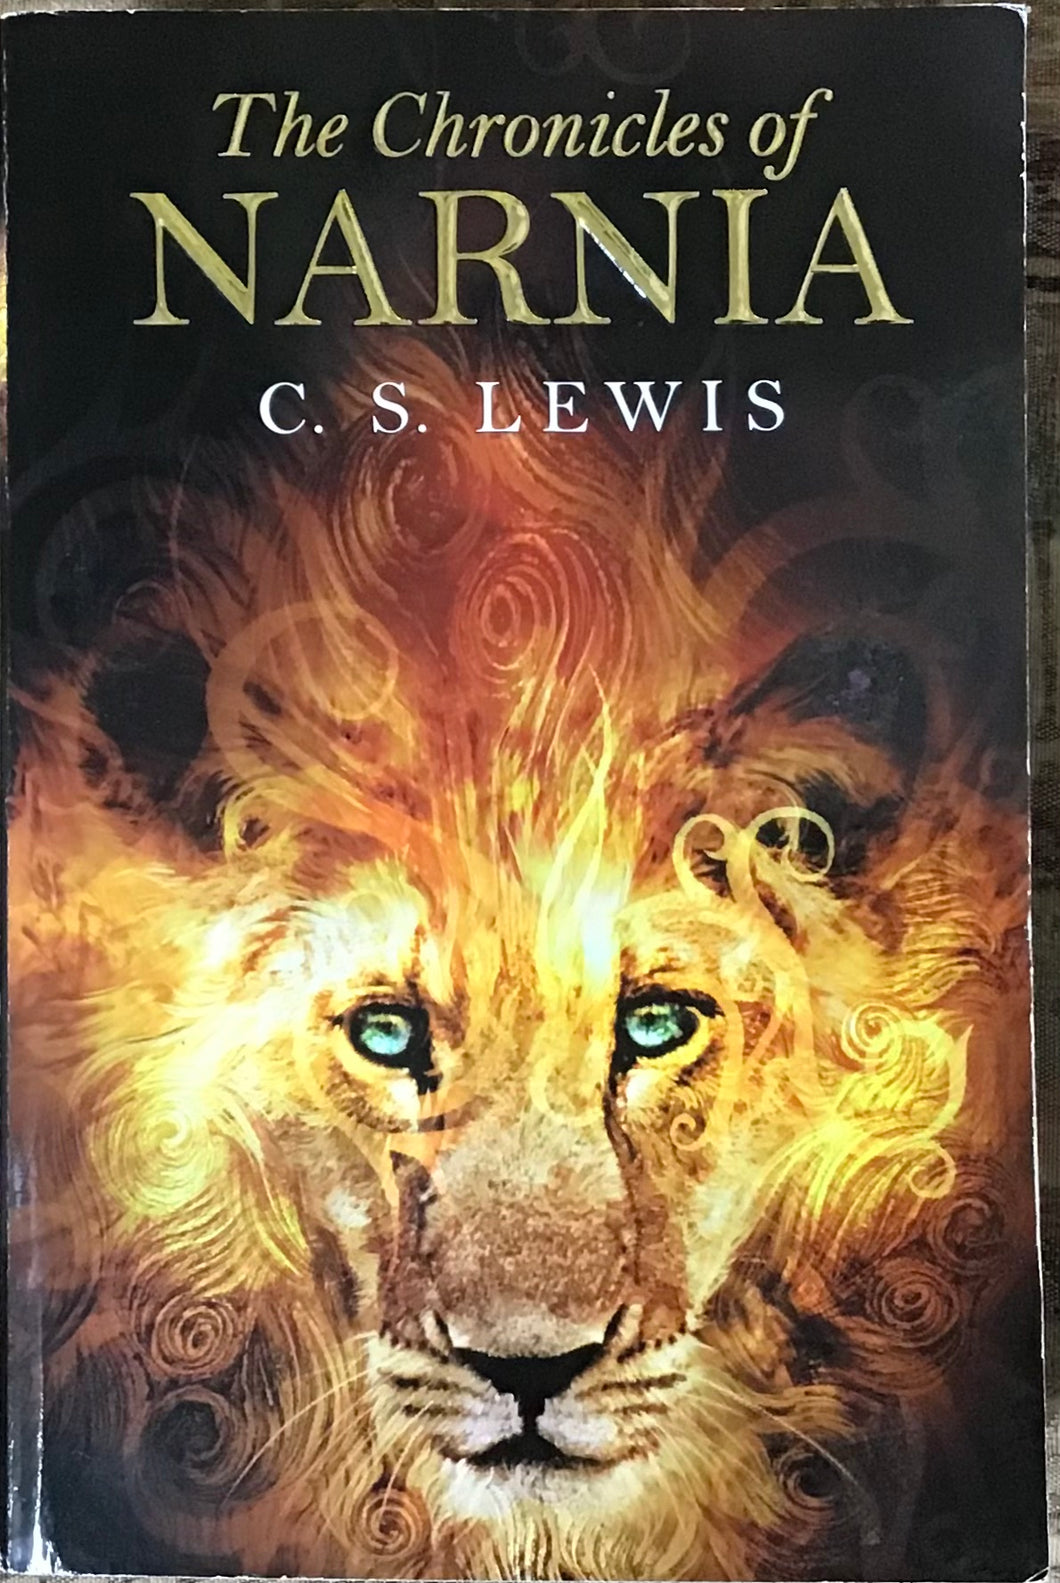 The Chronicles of Narnia, C.S. Lewis